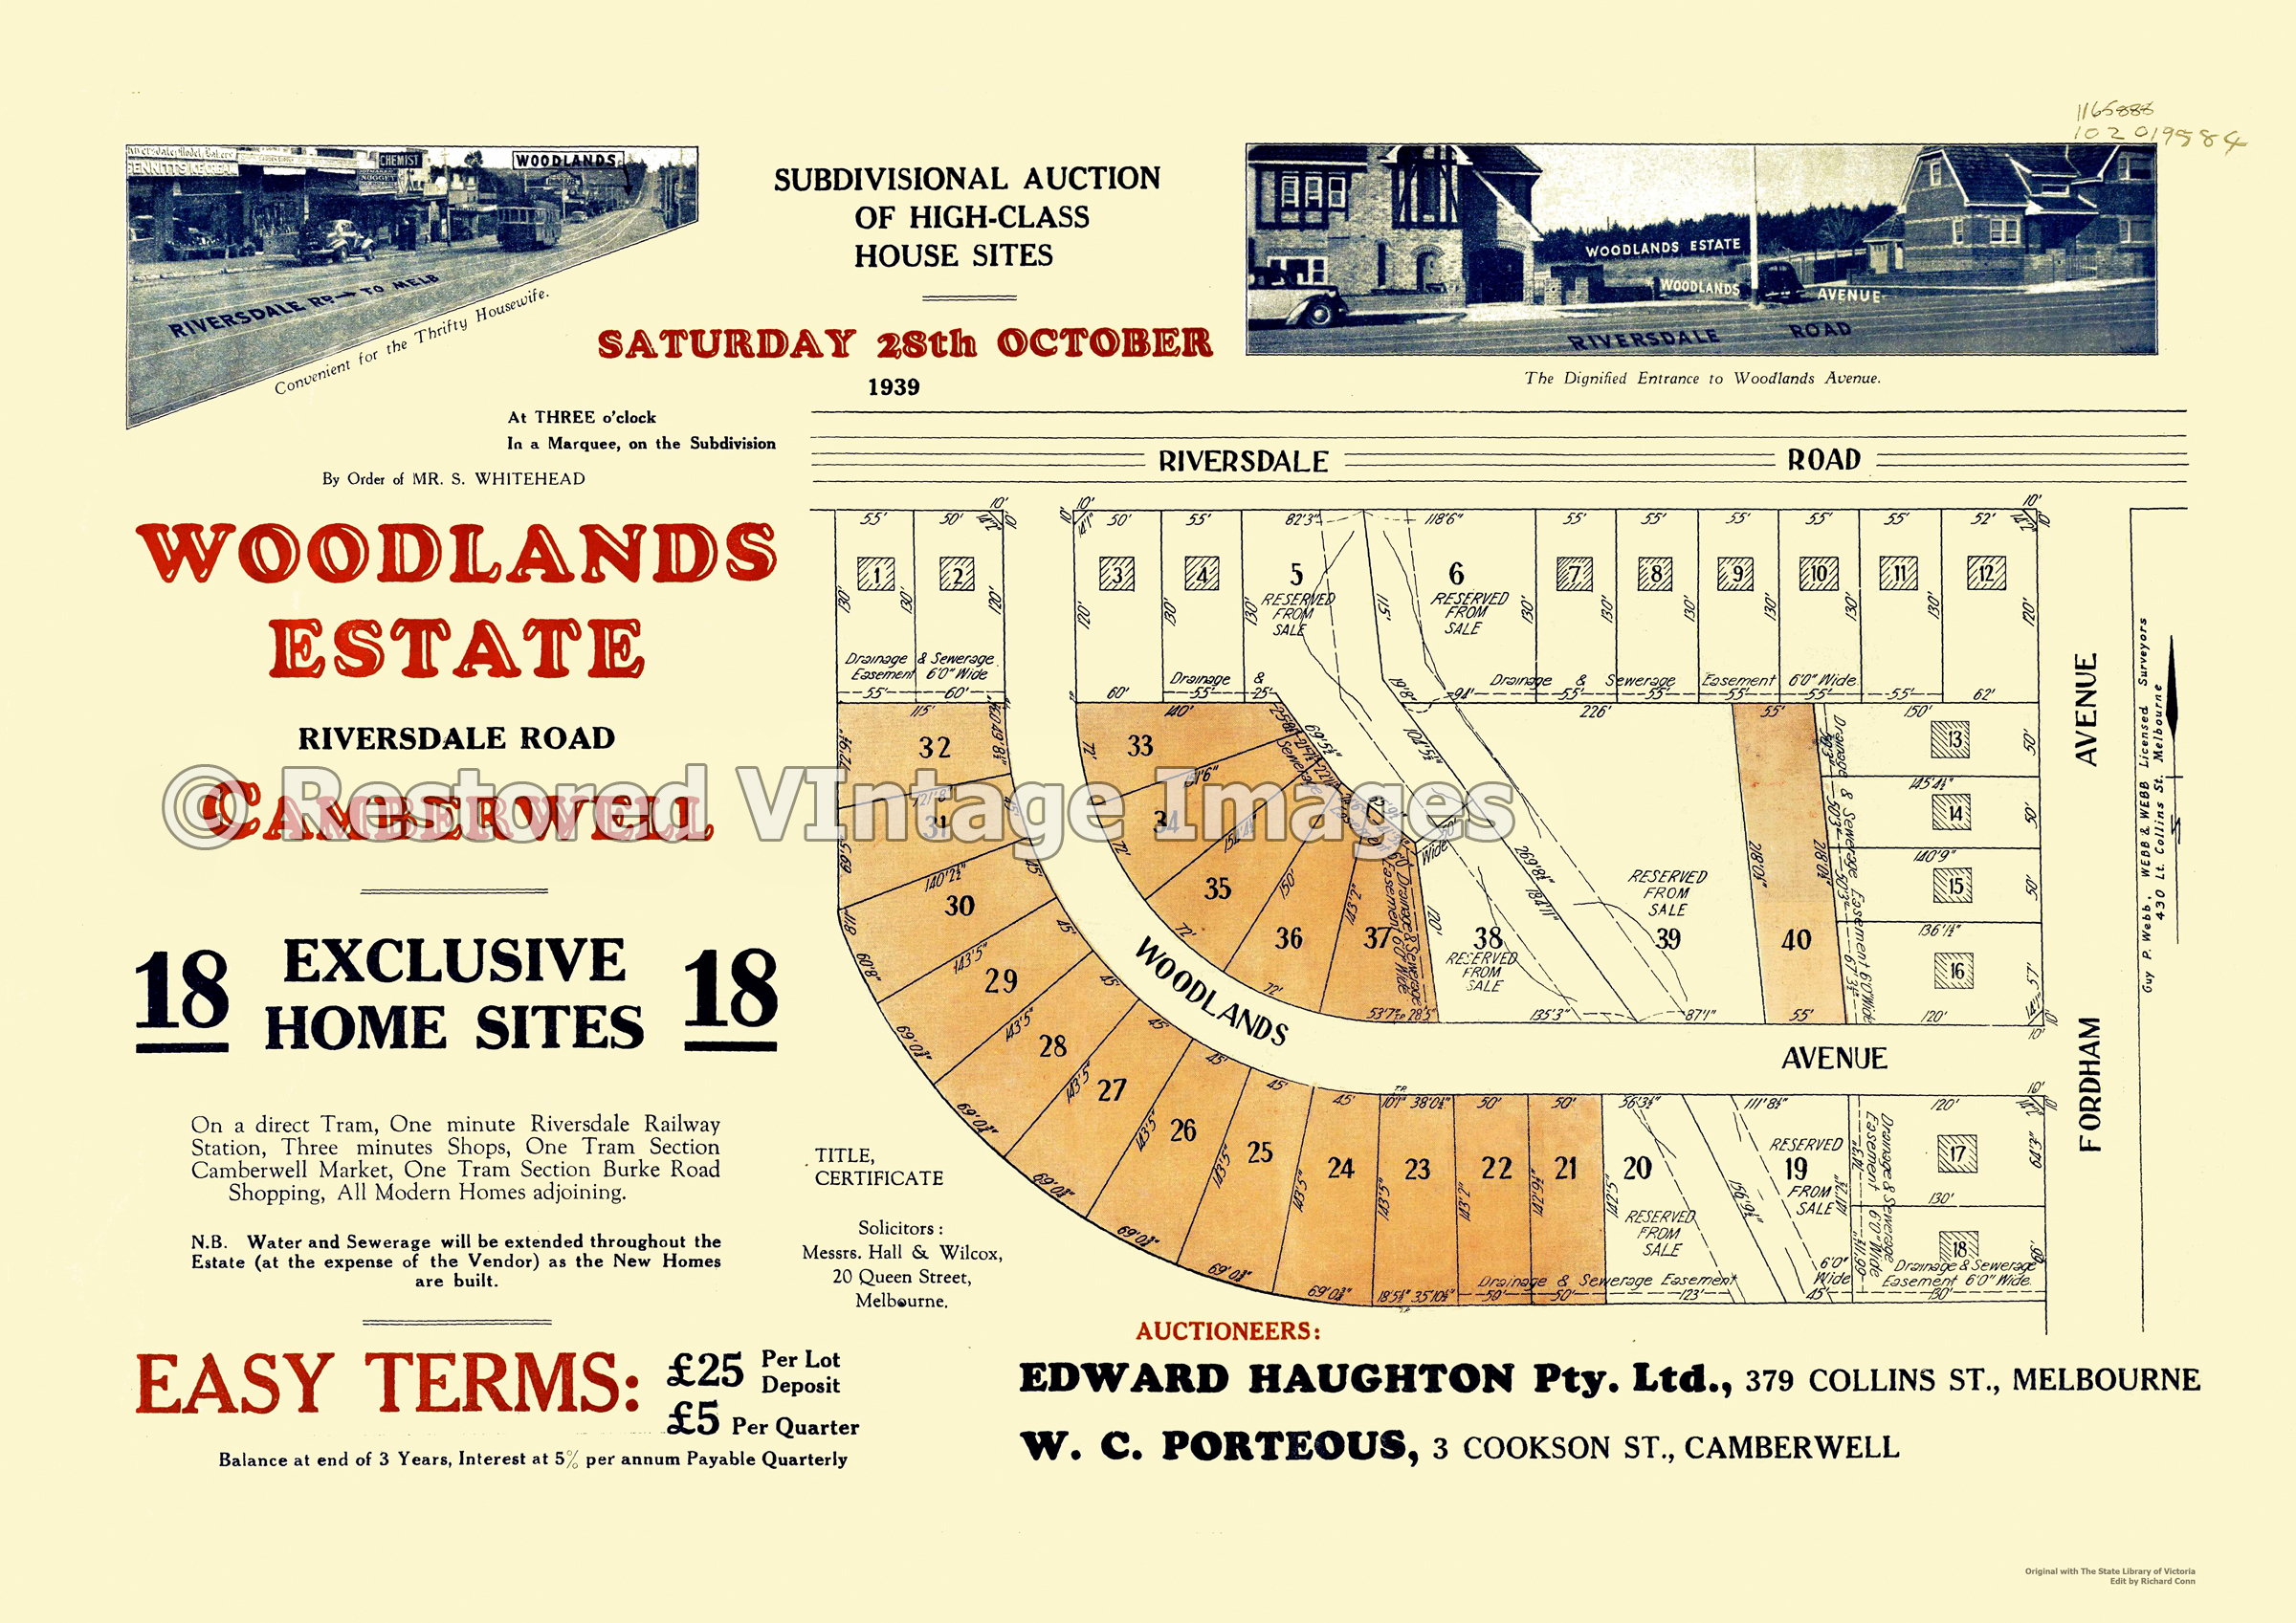 Woodlands Estate 28th October 1939 – Camberwell